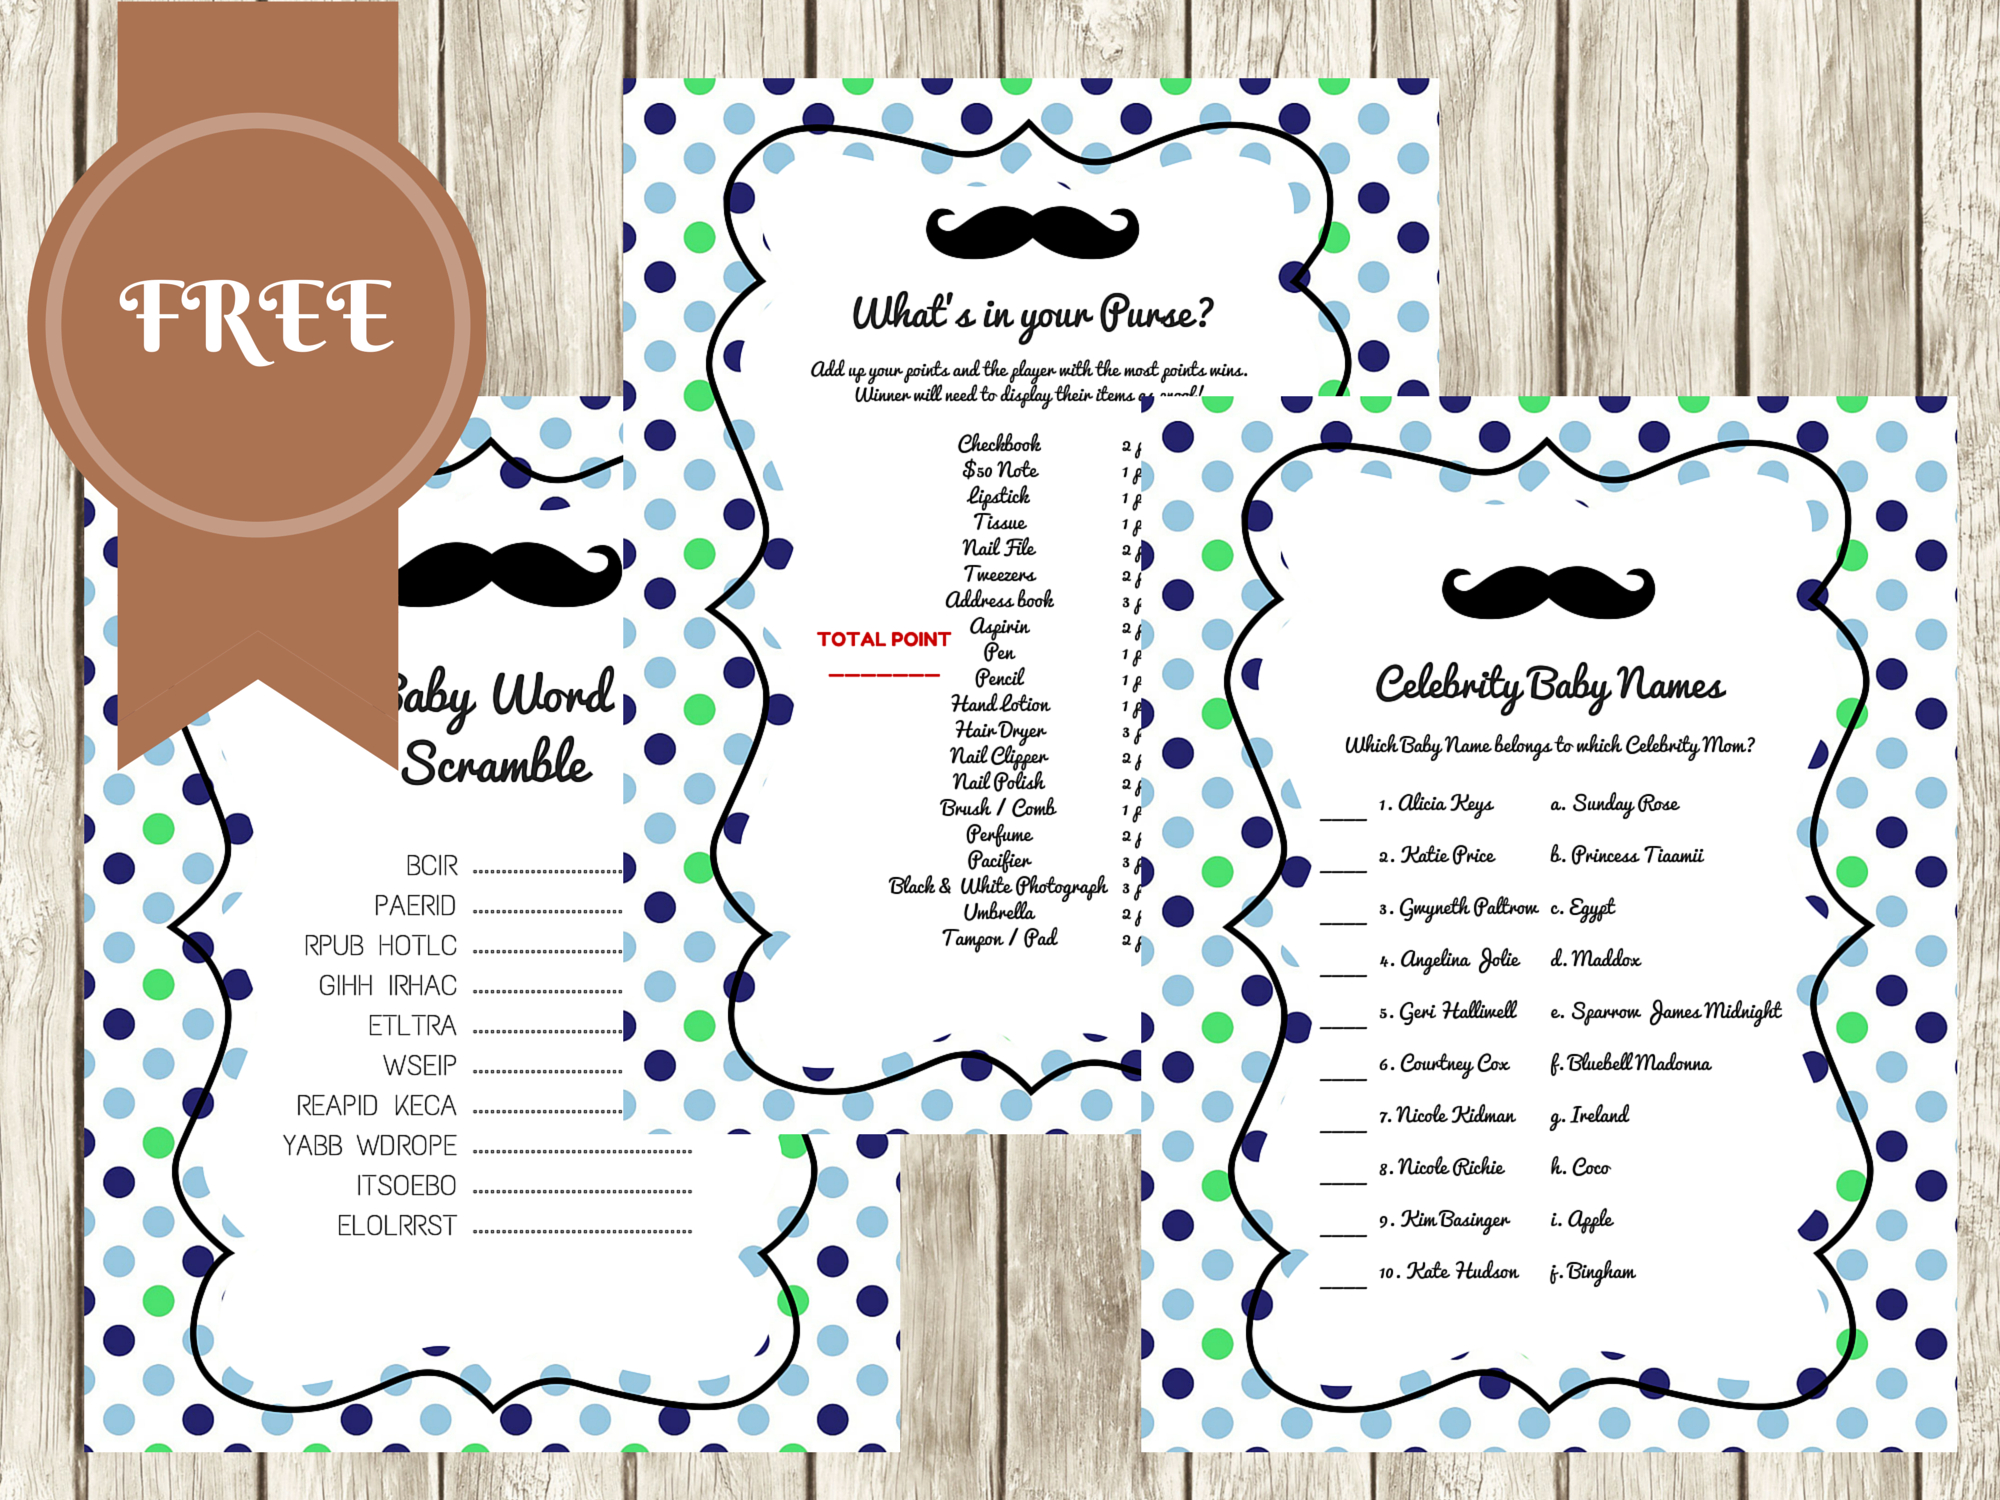 Free Mustache Baby Shower Games - Baby Shower Ideas - Themes - Games - Name That Mustache Game Printable Free